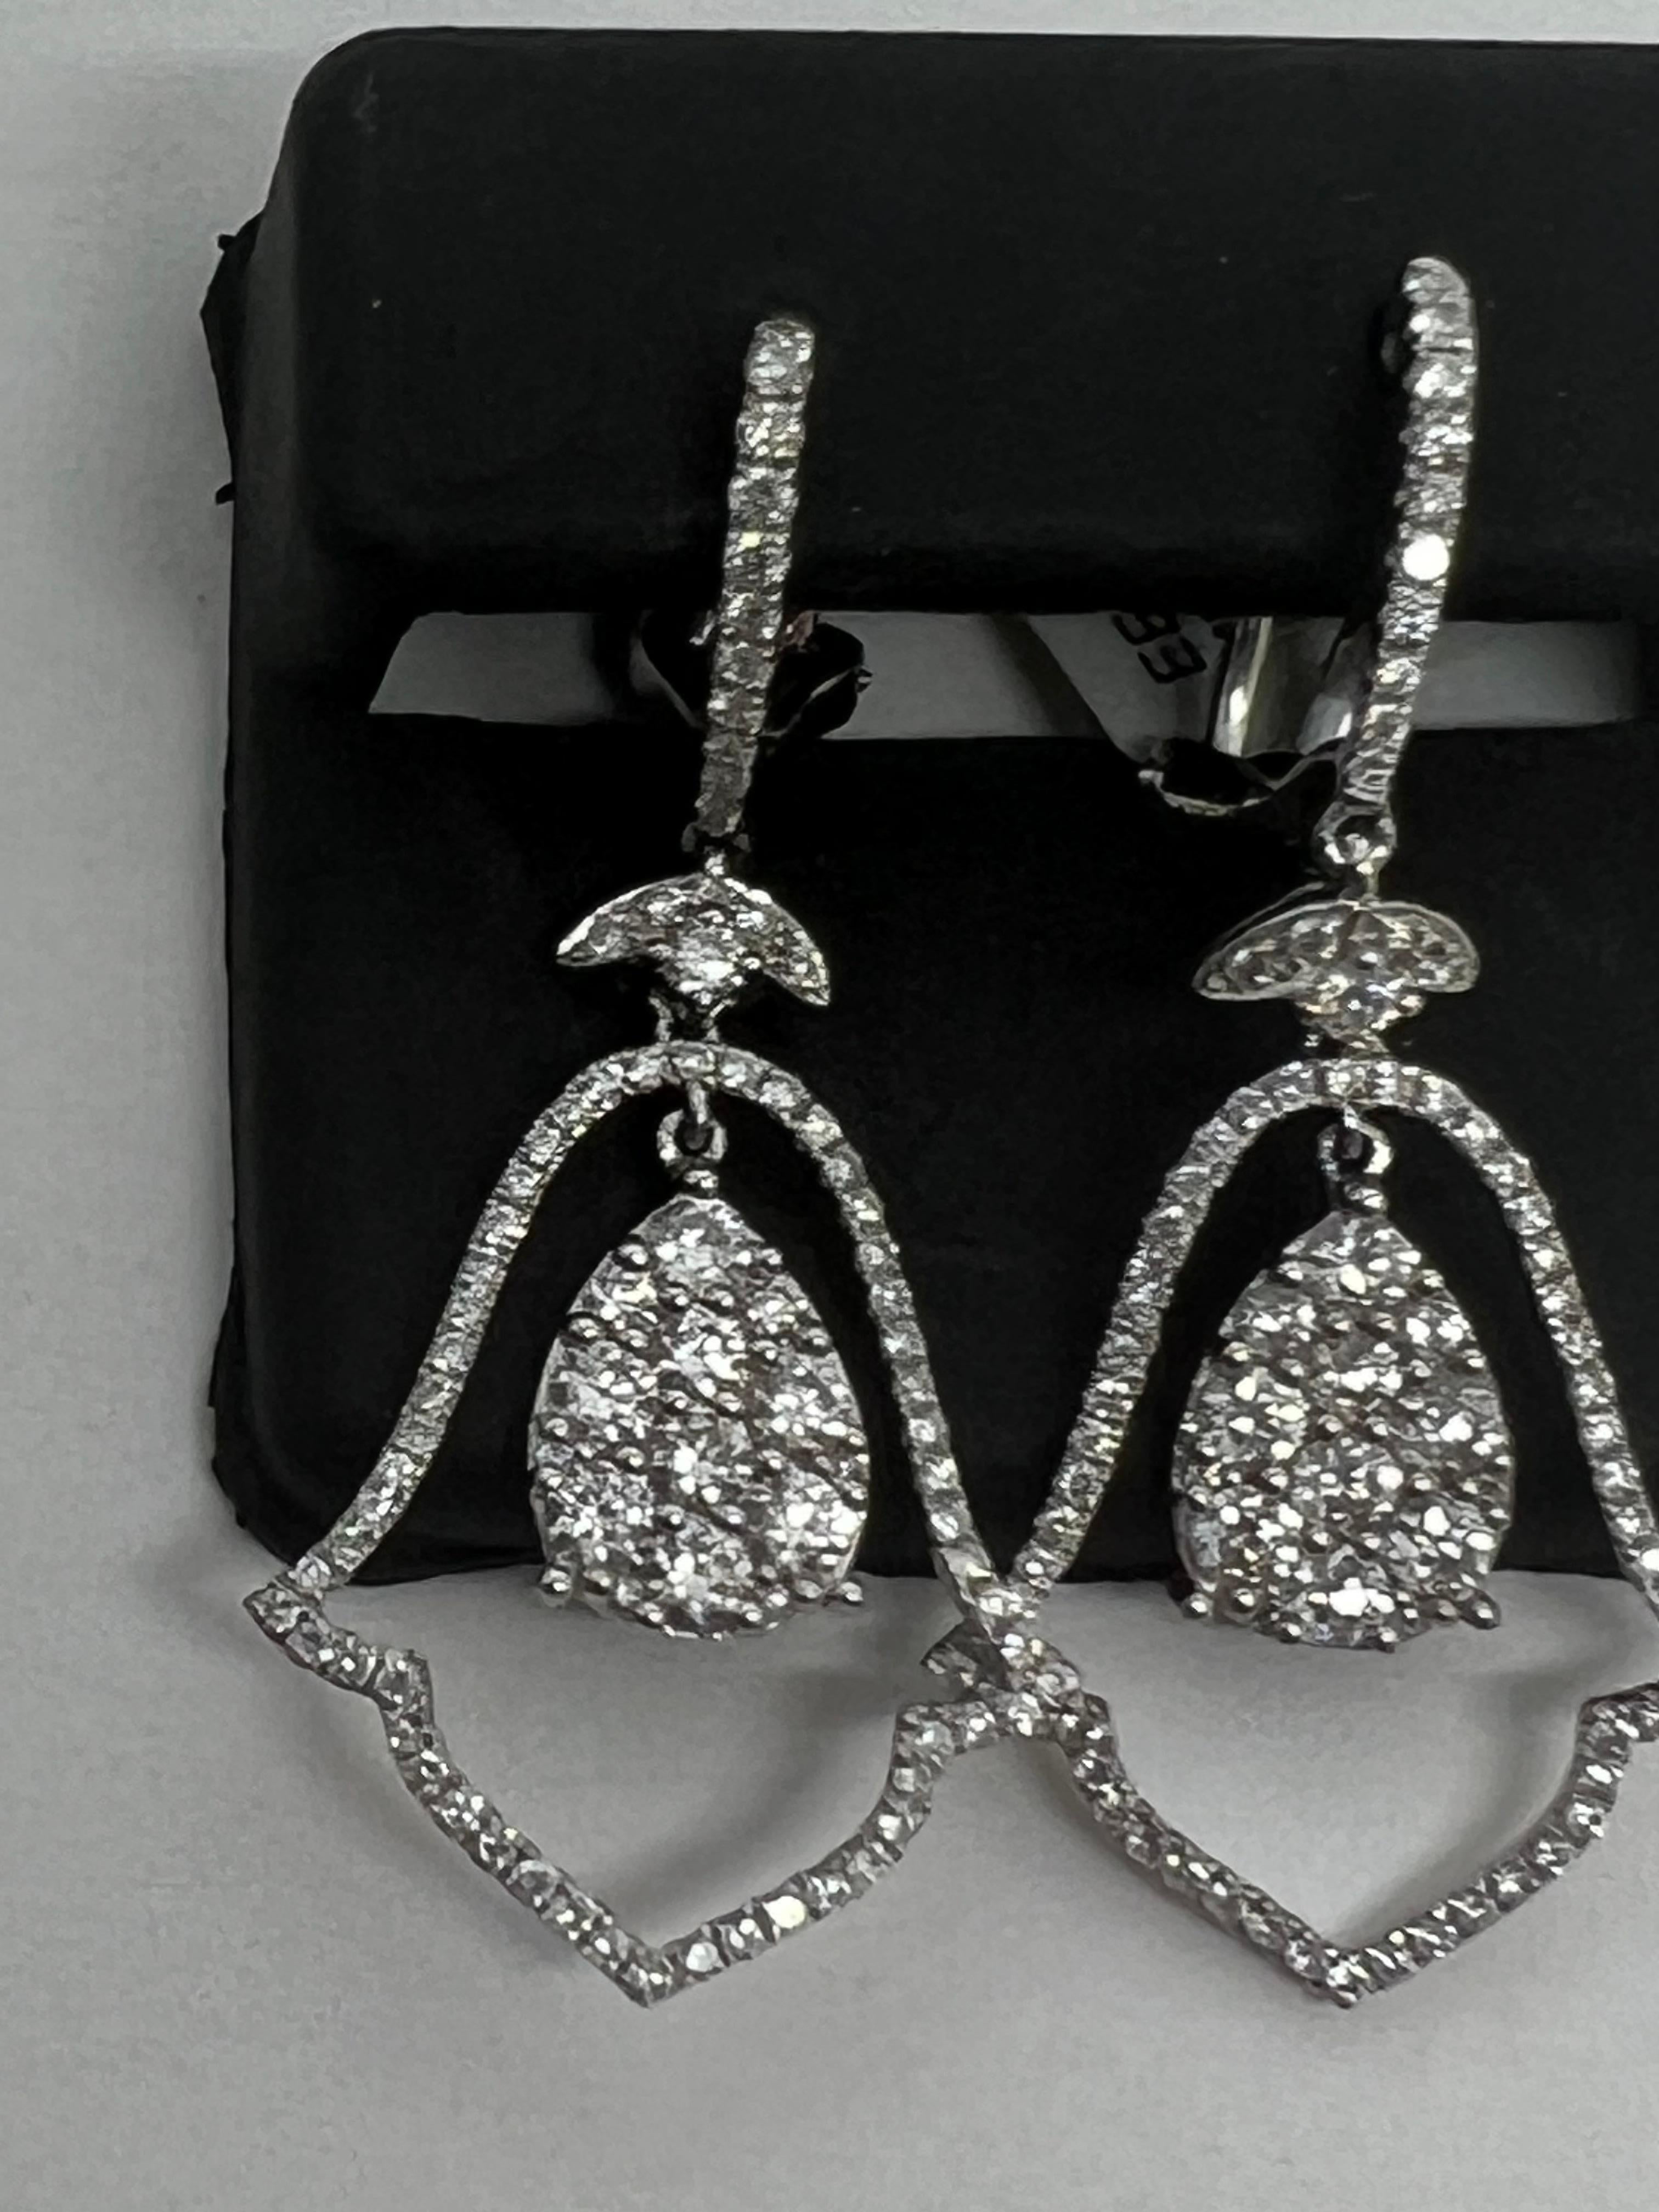 Elevate your jewelry collection with these stunning 14k white gold earrings by K. Bell. Adorned with natural, round-cut diamonds in a pavé setting, these dangle/drop earrings are perfect for any occasion. The white diamond color against the gold